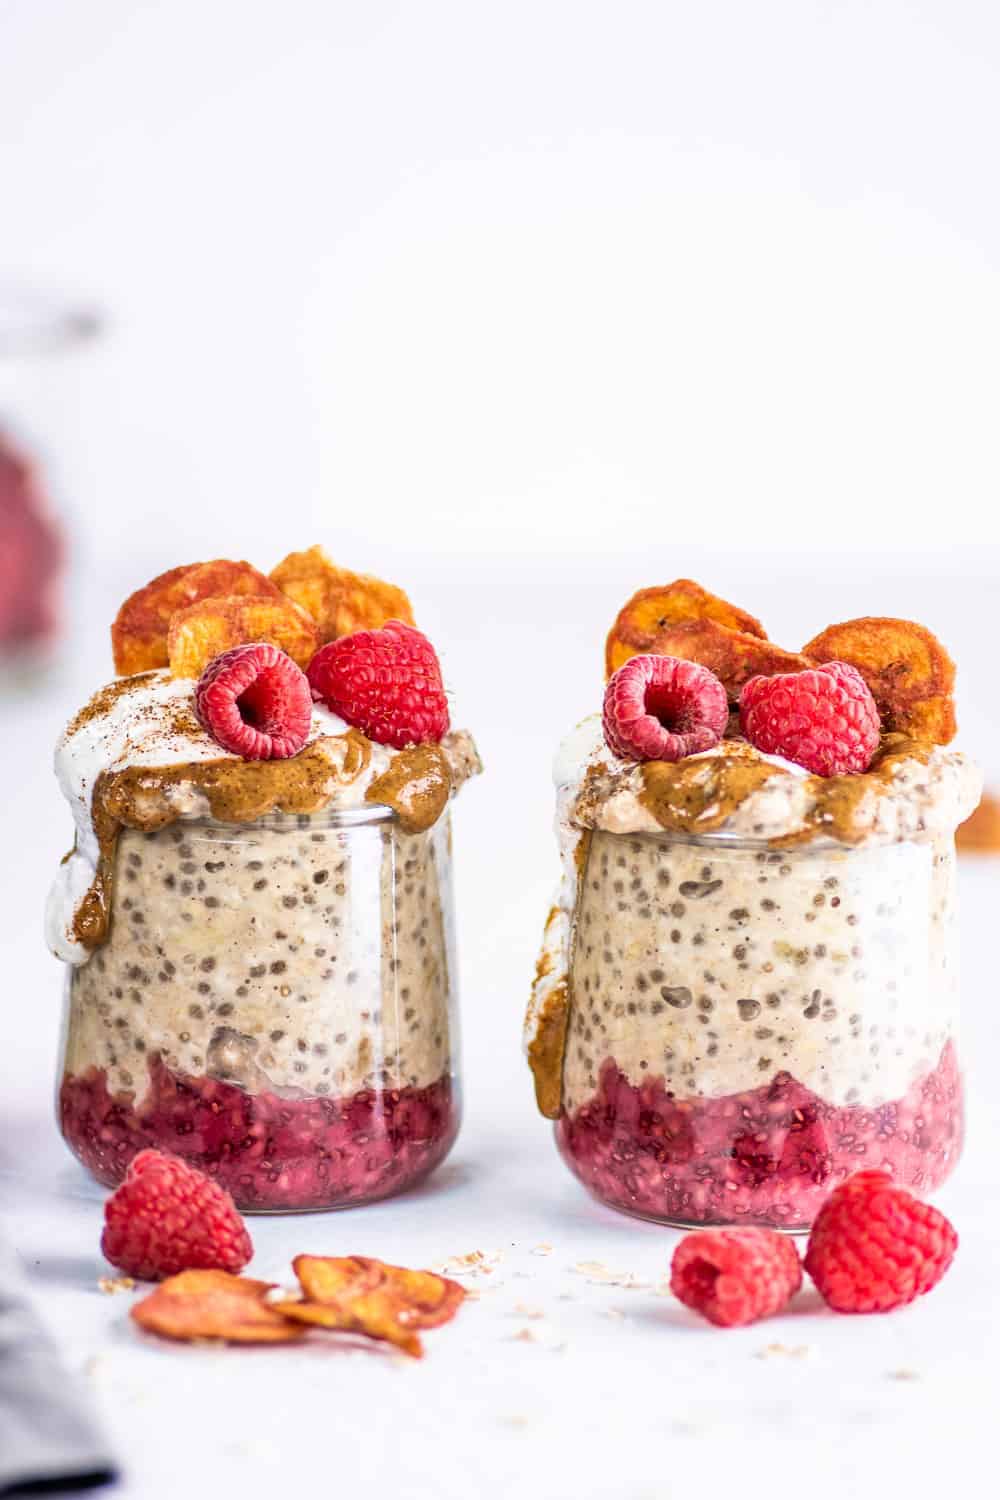 Easy Banana Overnight Oats with Chia Seeds (Vegan, Gluten-Free) | The ...